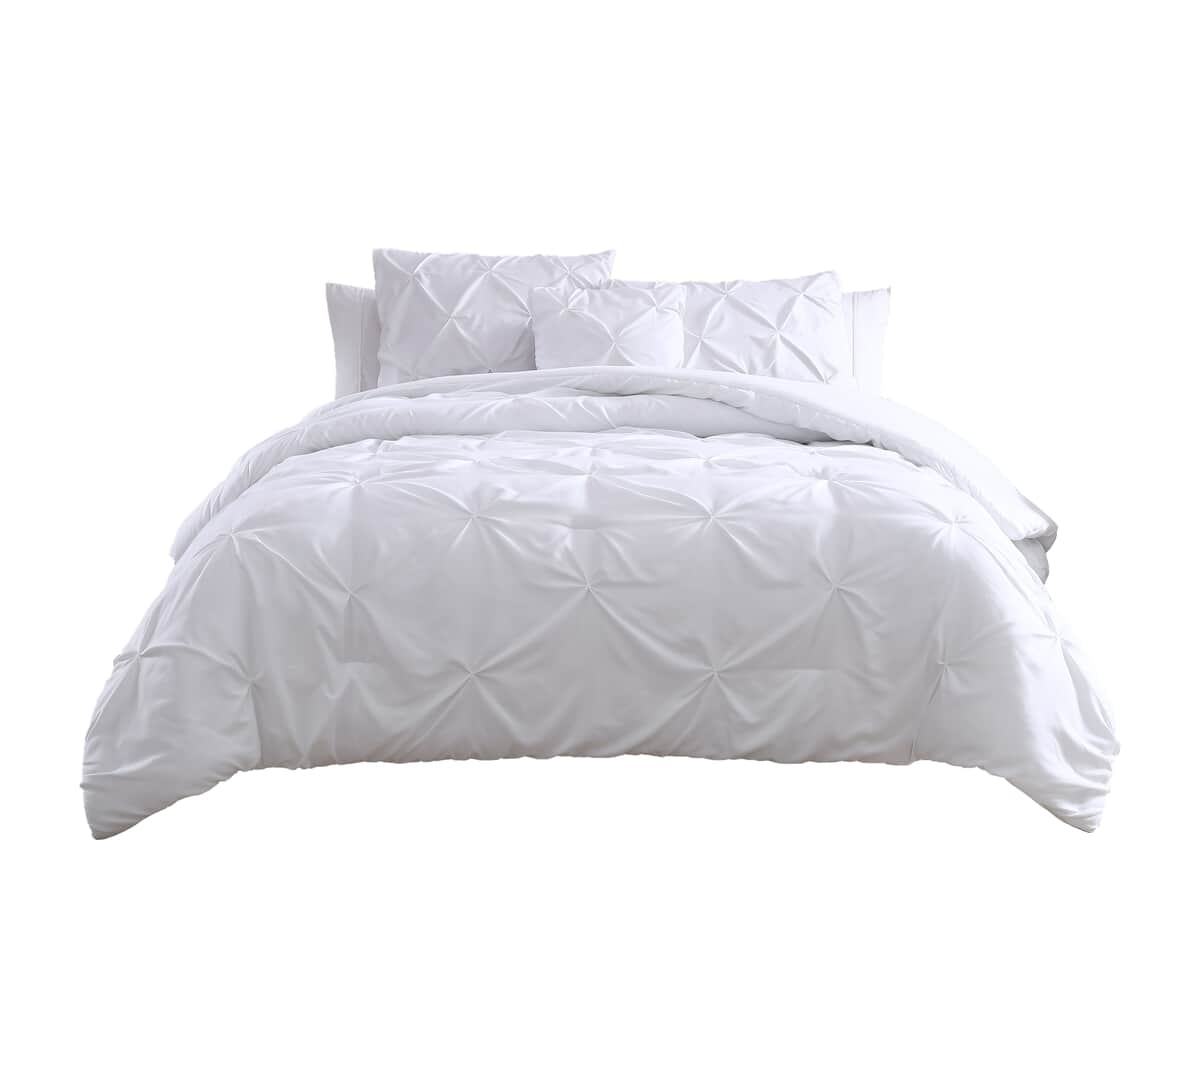 The Nesting Company- Spruce 4 Piece Comforter Set Queen White image number 3